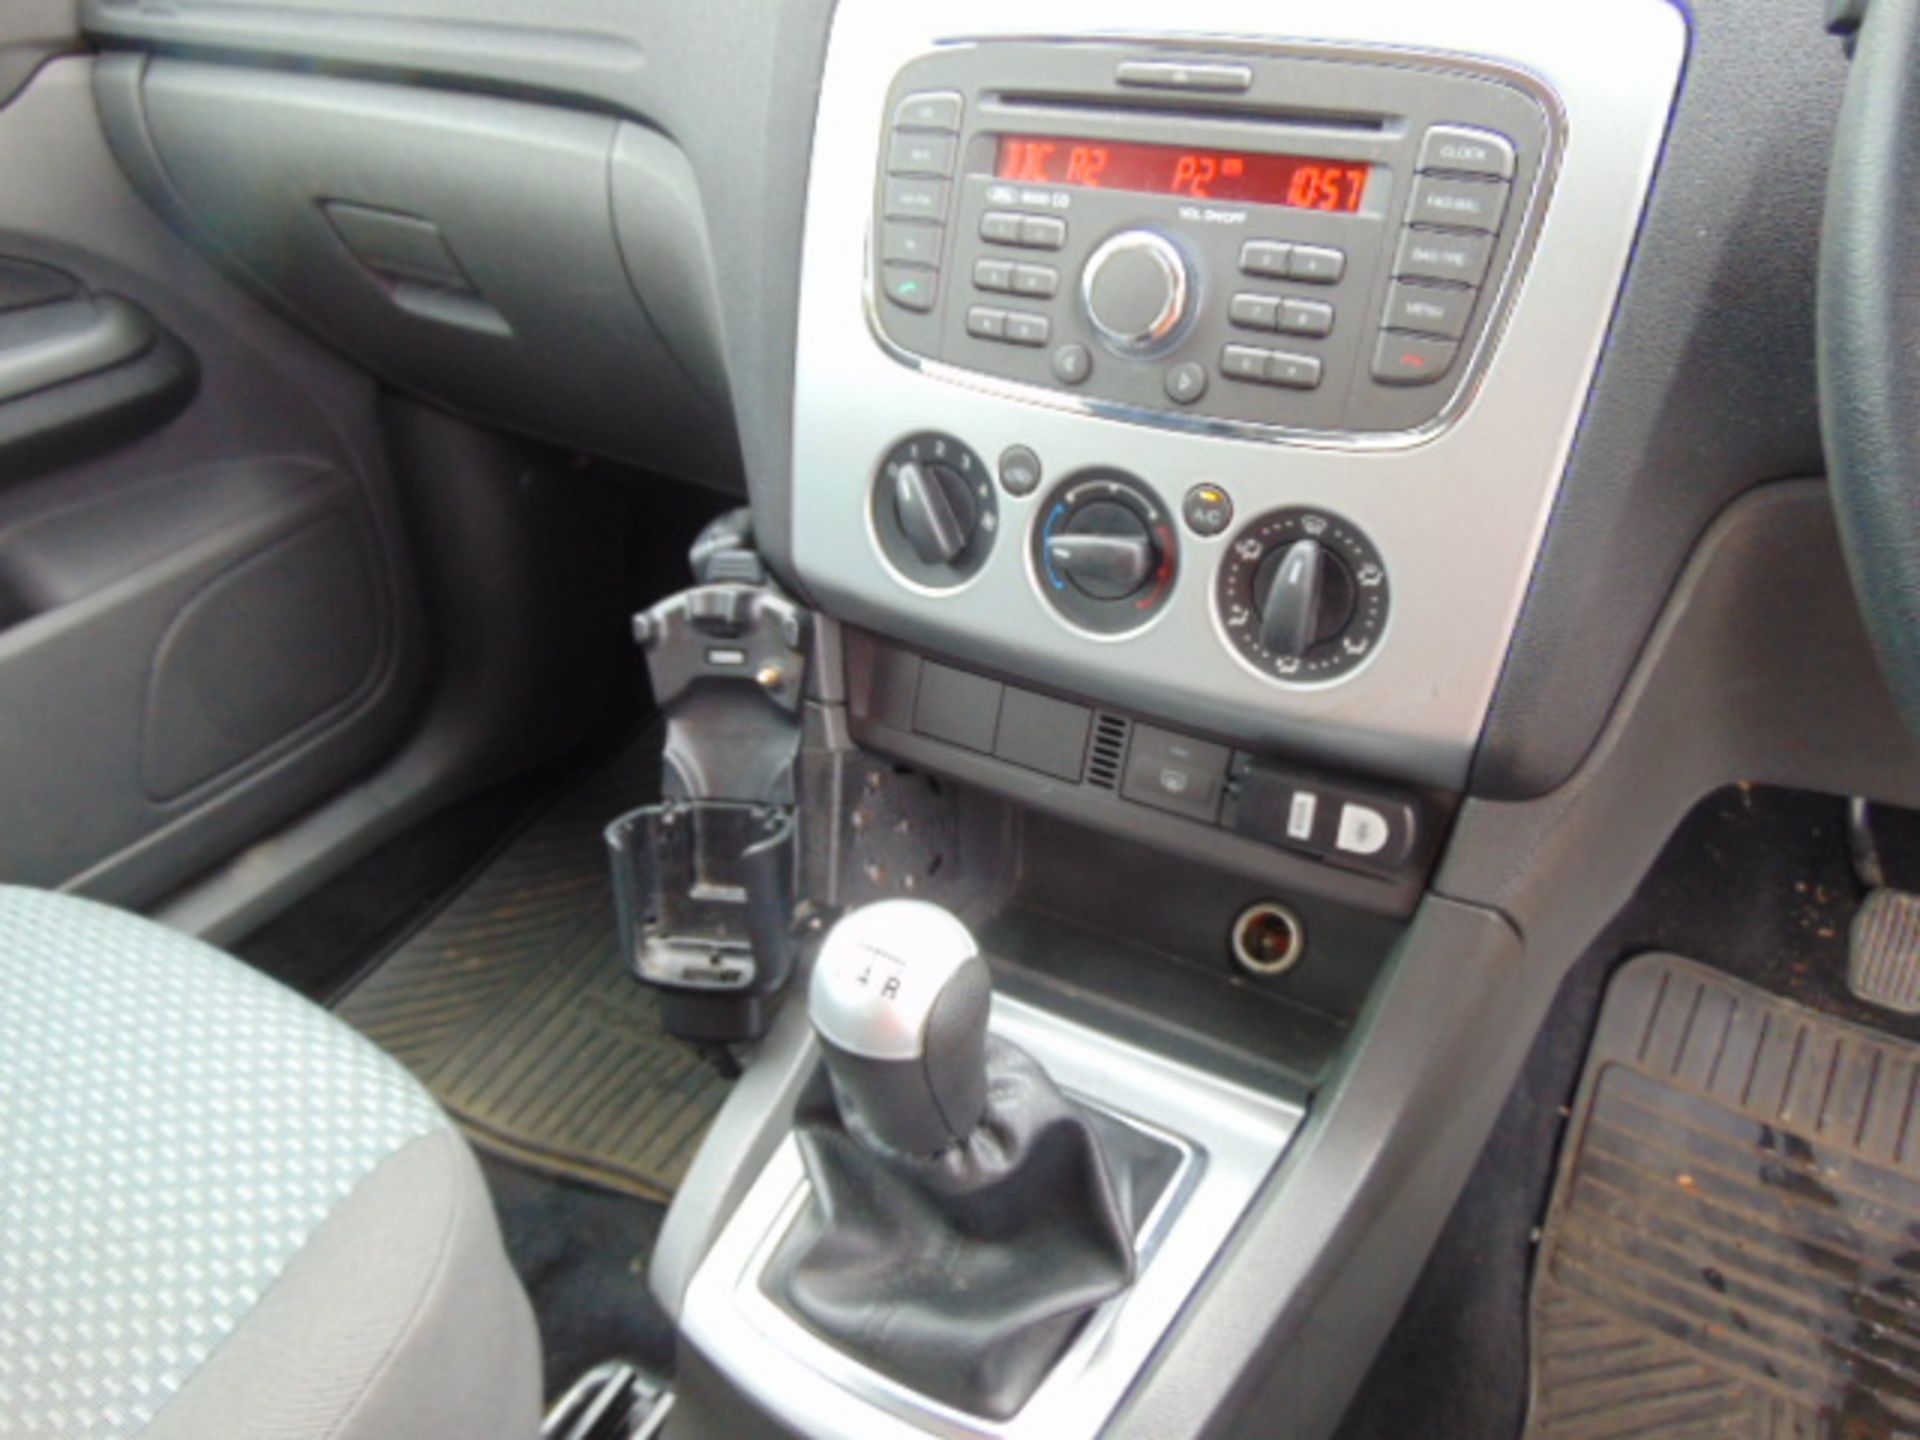 2008 Ford Focus 1.8 TDCI Style Hatchback - Image 13 of 18